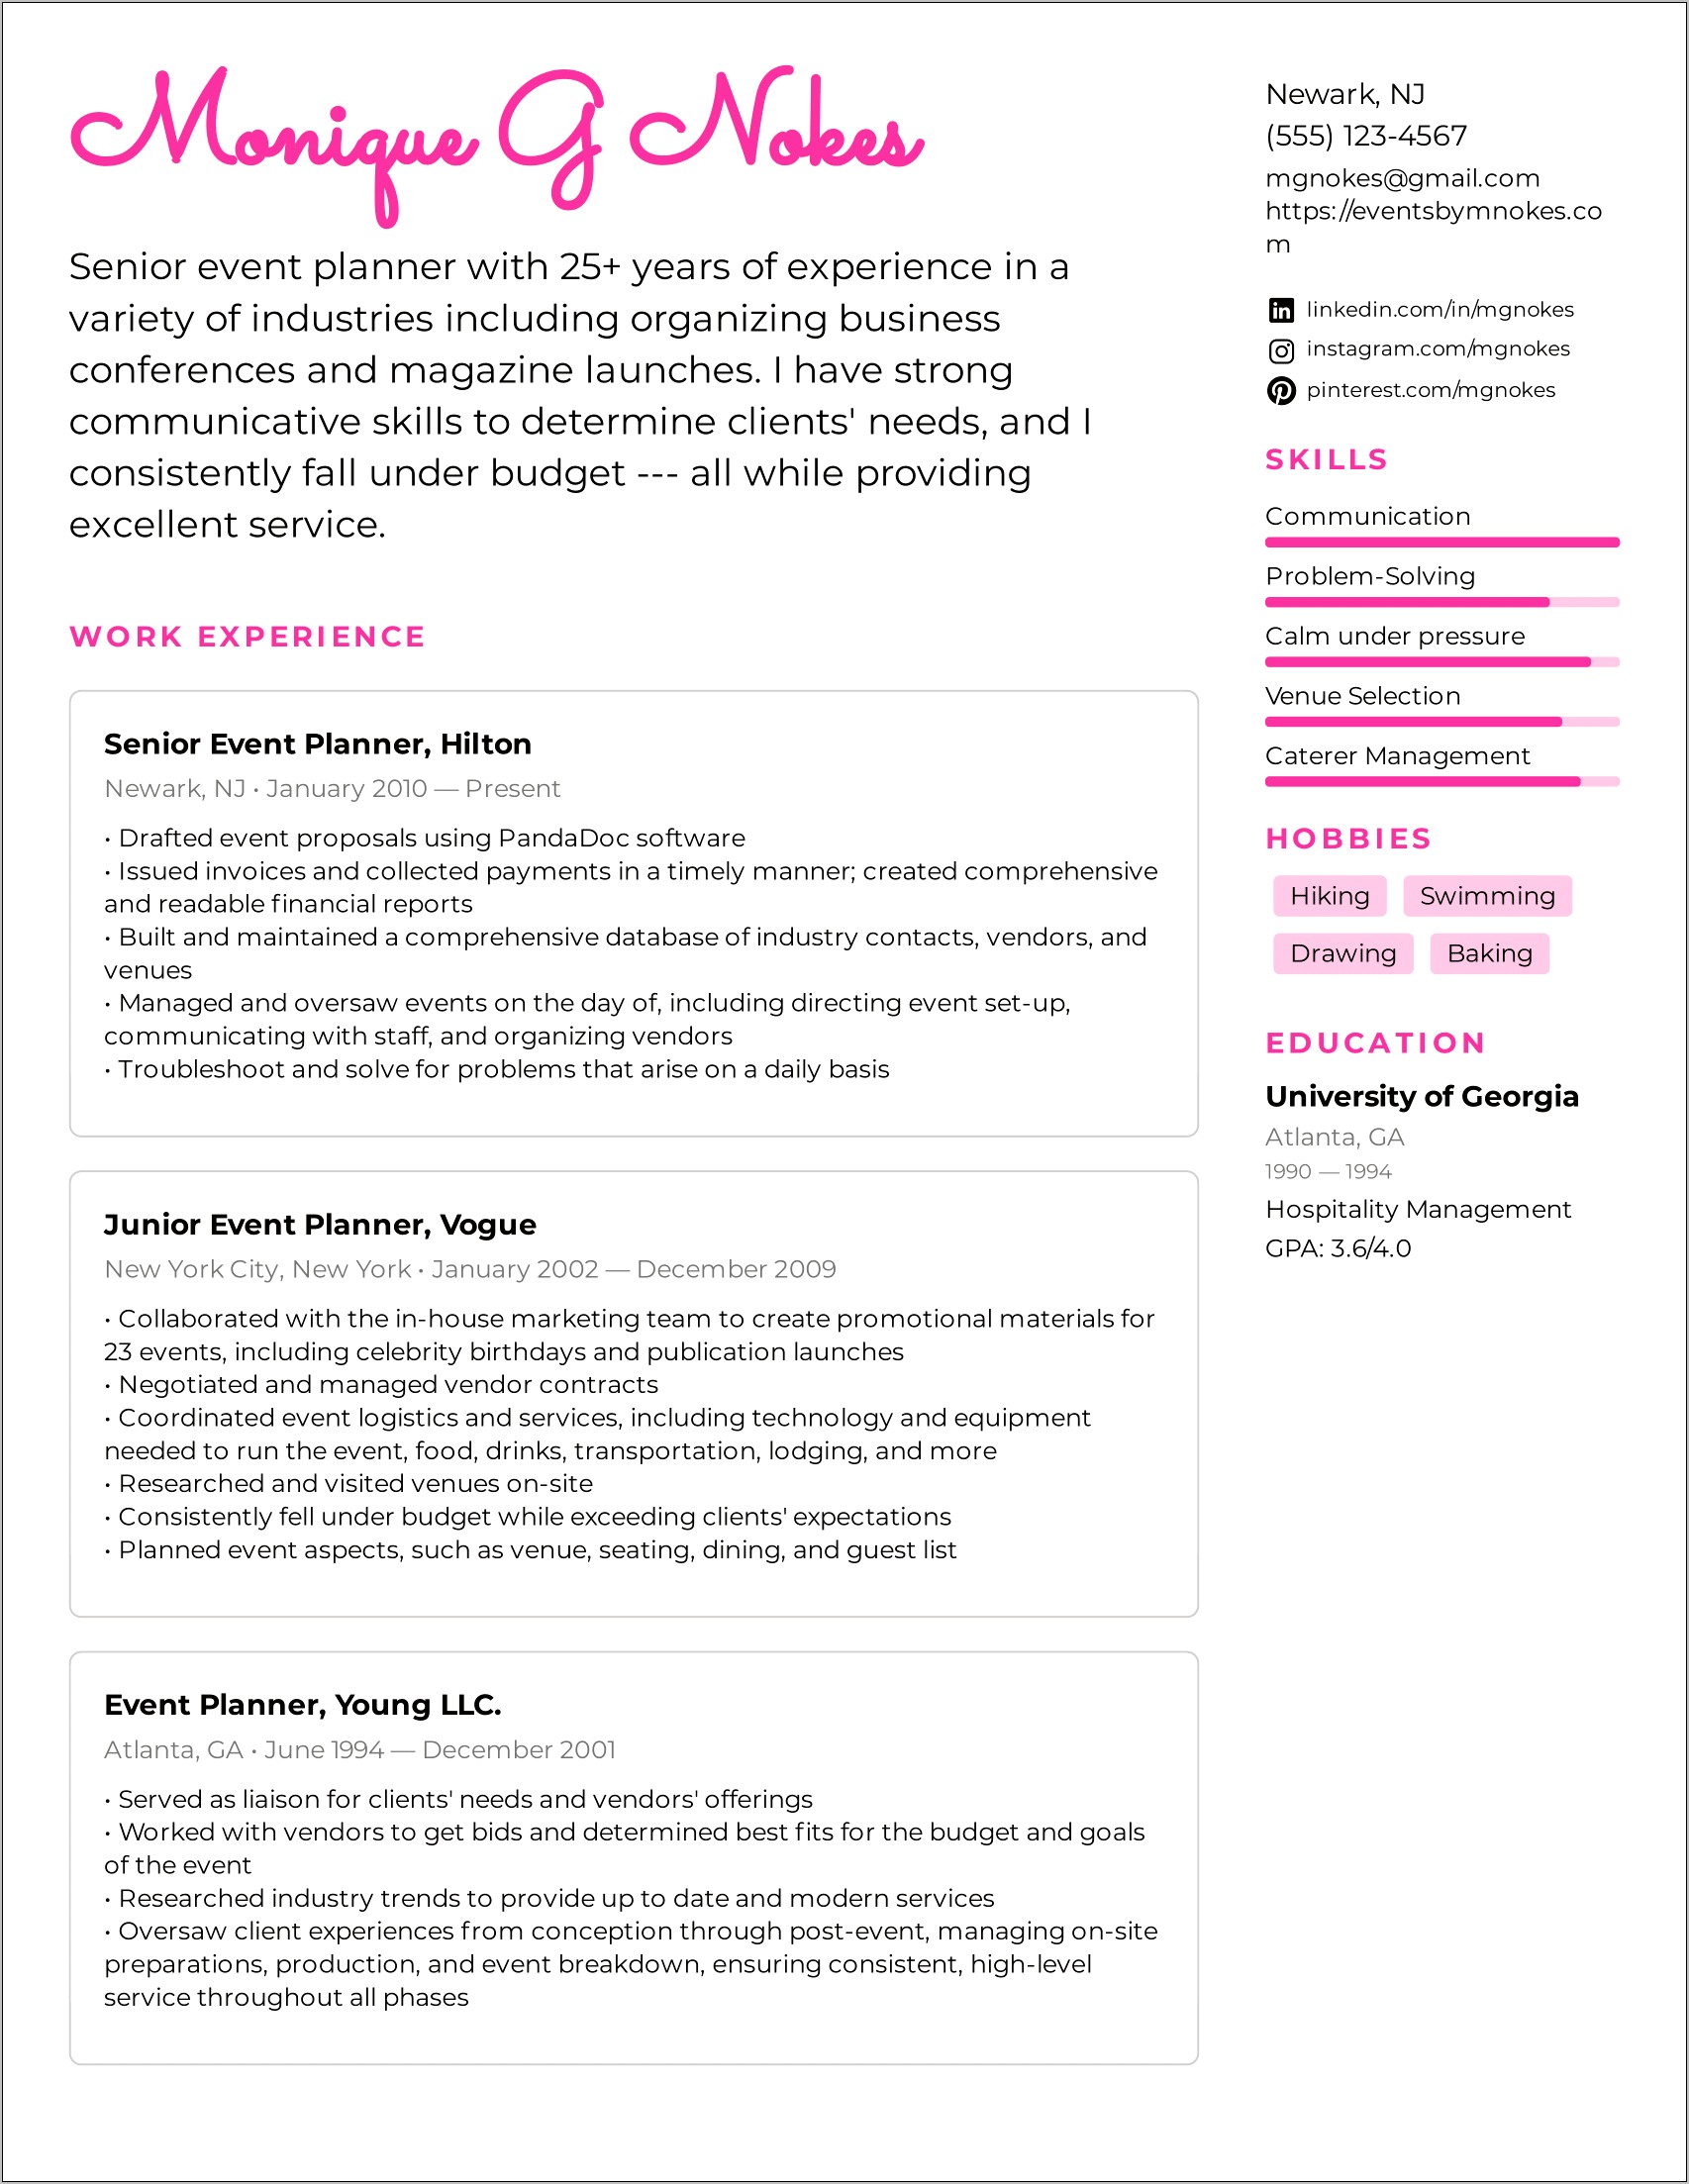 Hard Skills To Include For Csr Resume